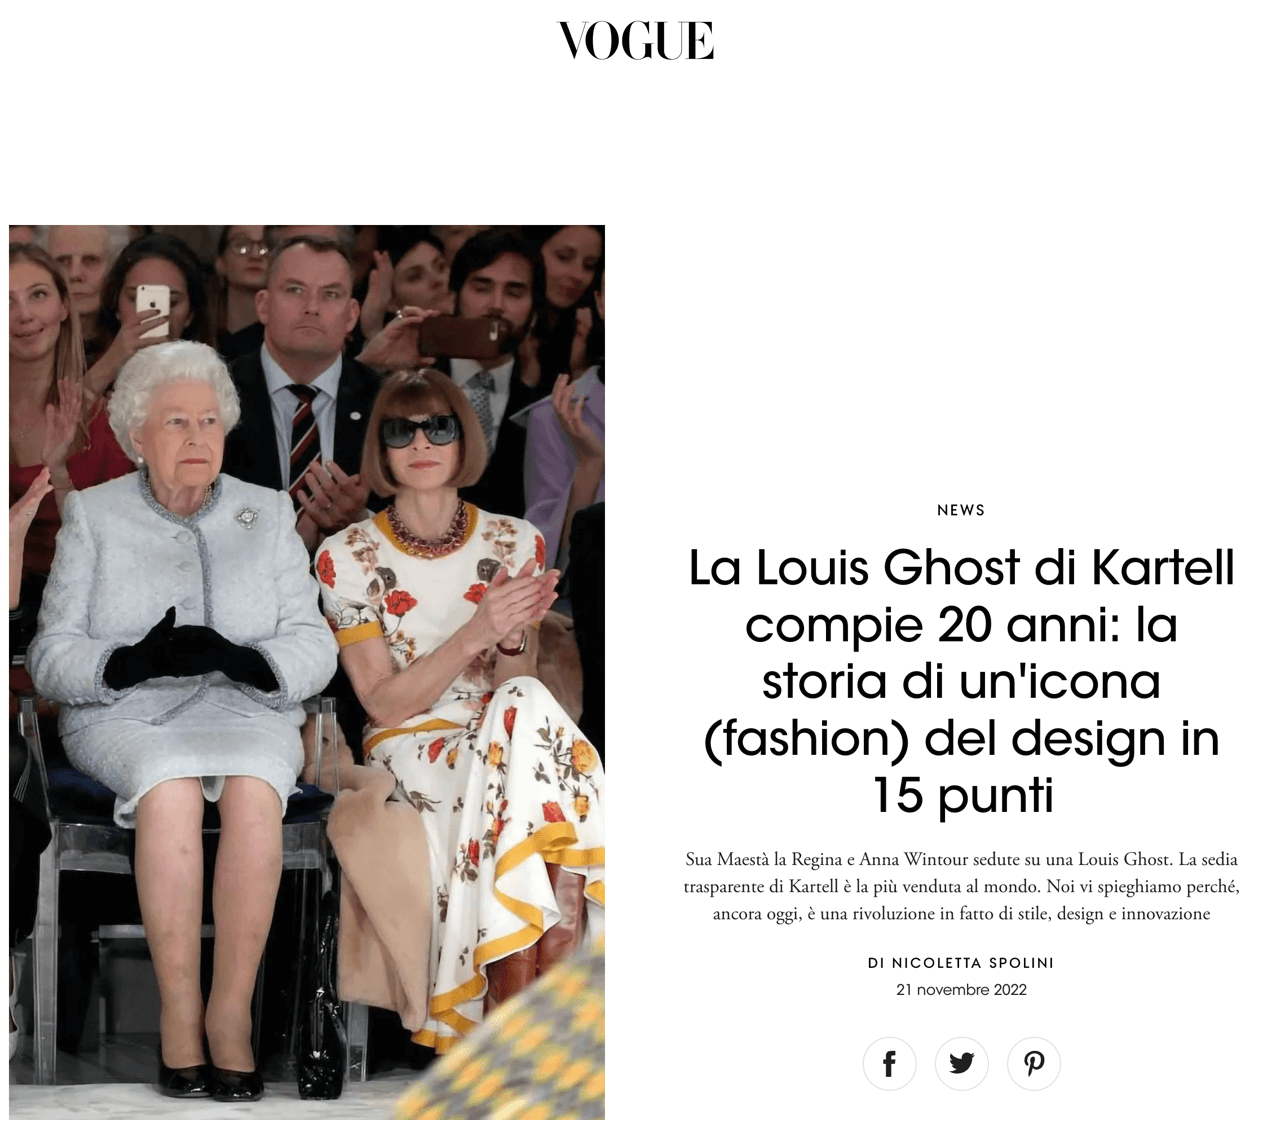 Kartell's Louis Ghost turns 20: the story of a (fashion) design icon in 15 points